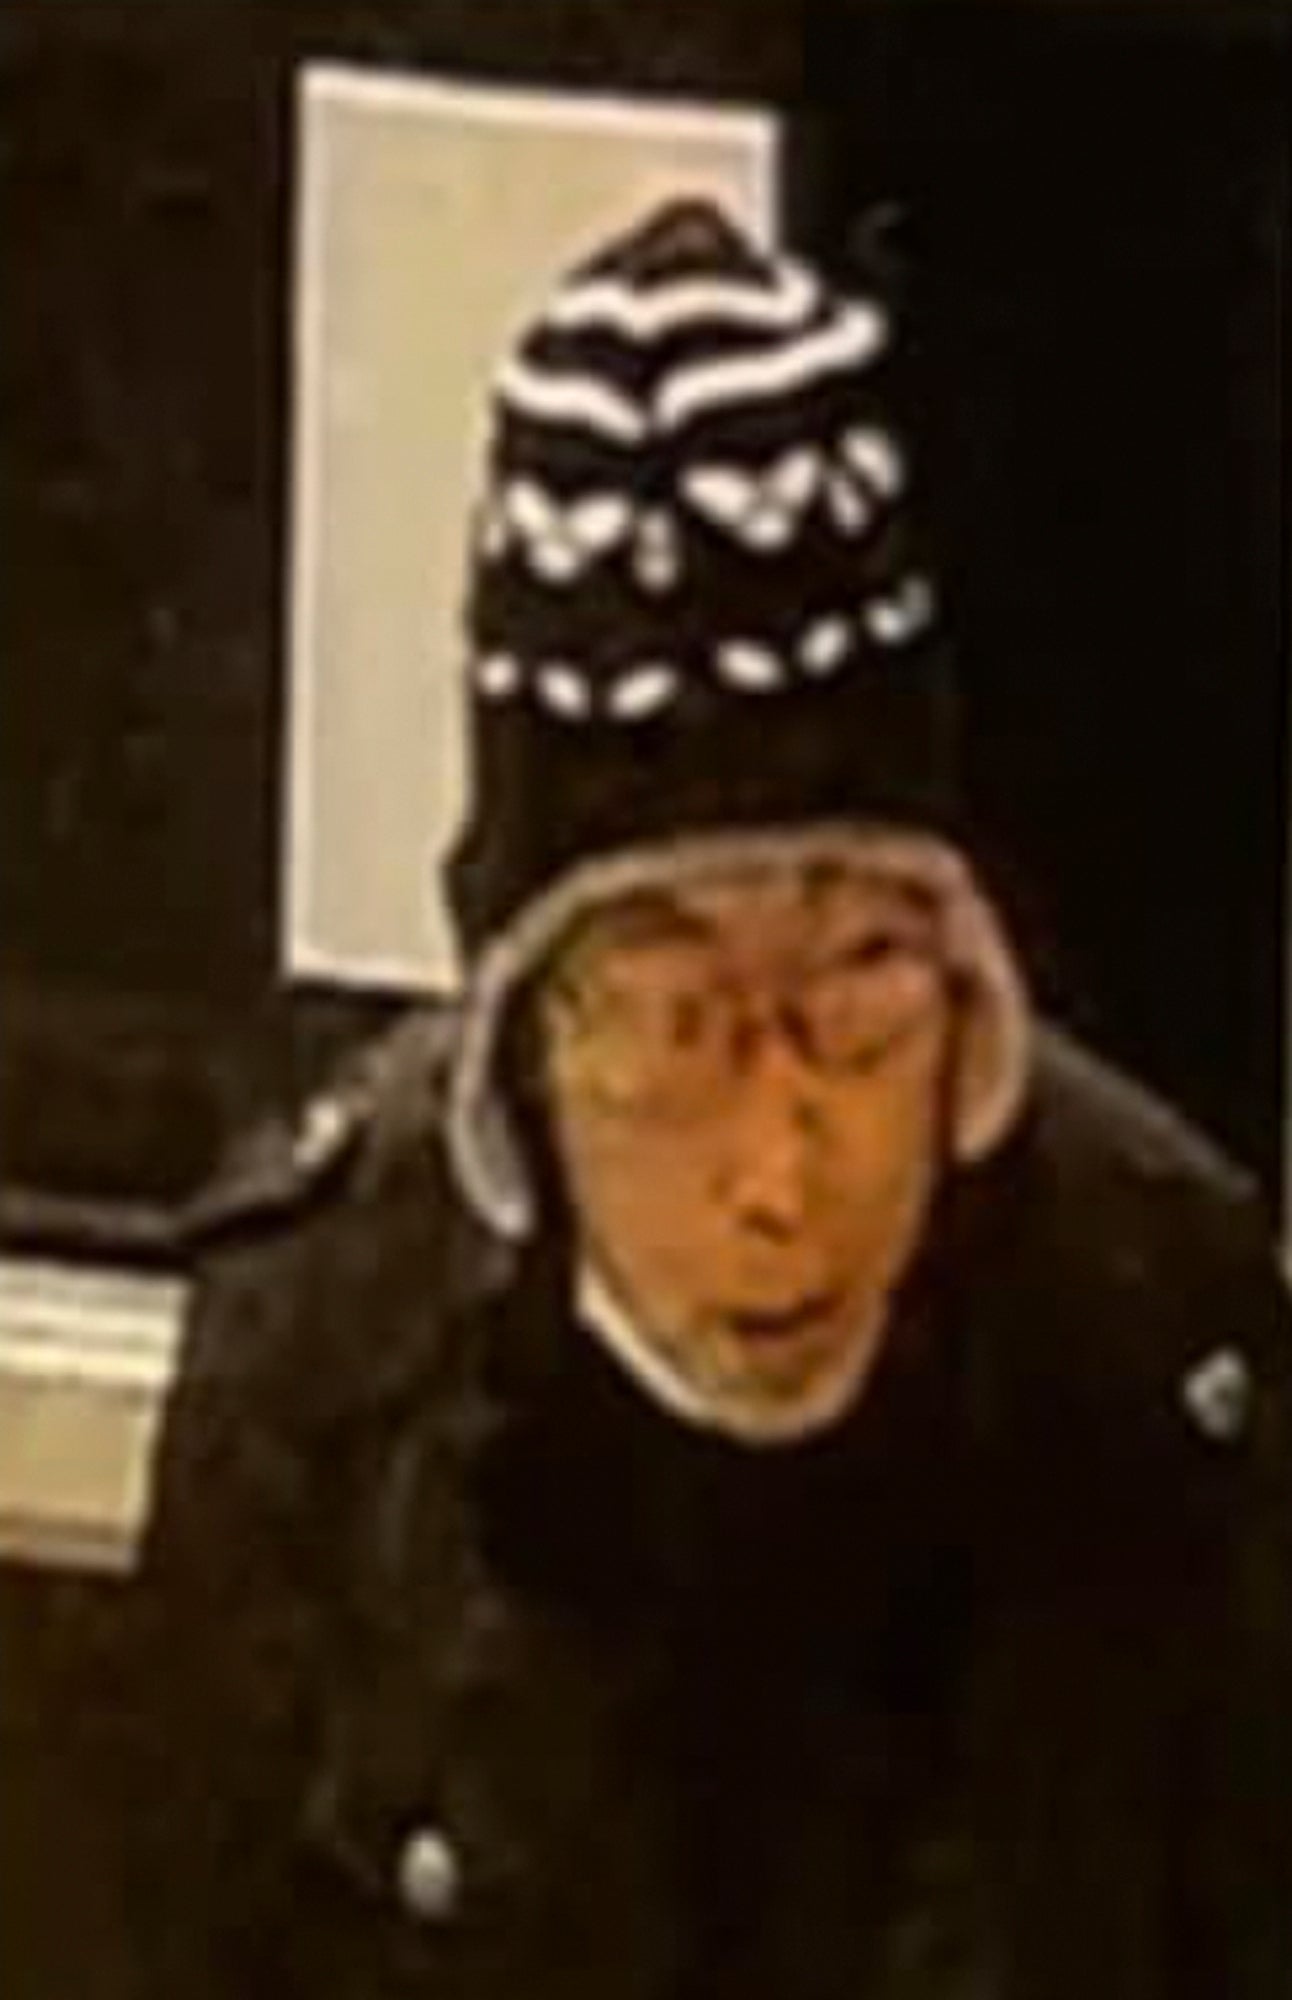 This image provided by the Los Angeles County Sheriff's Department shows a male suspect allegedly involved in a shooting on Saturday, Jan. 21, 2023